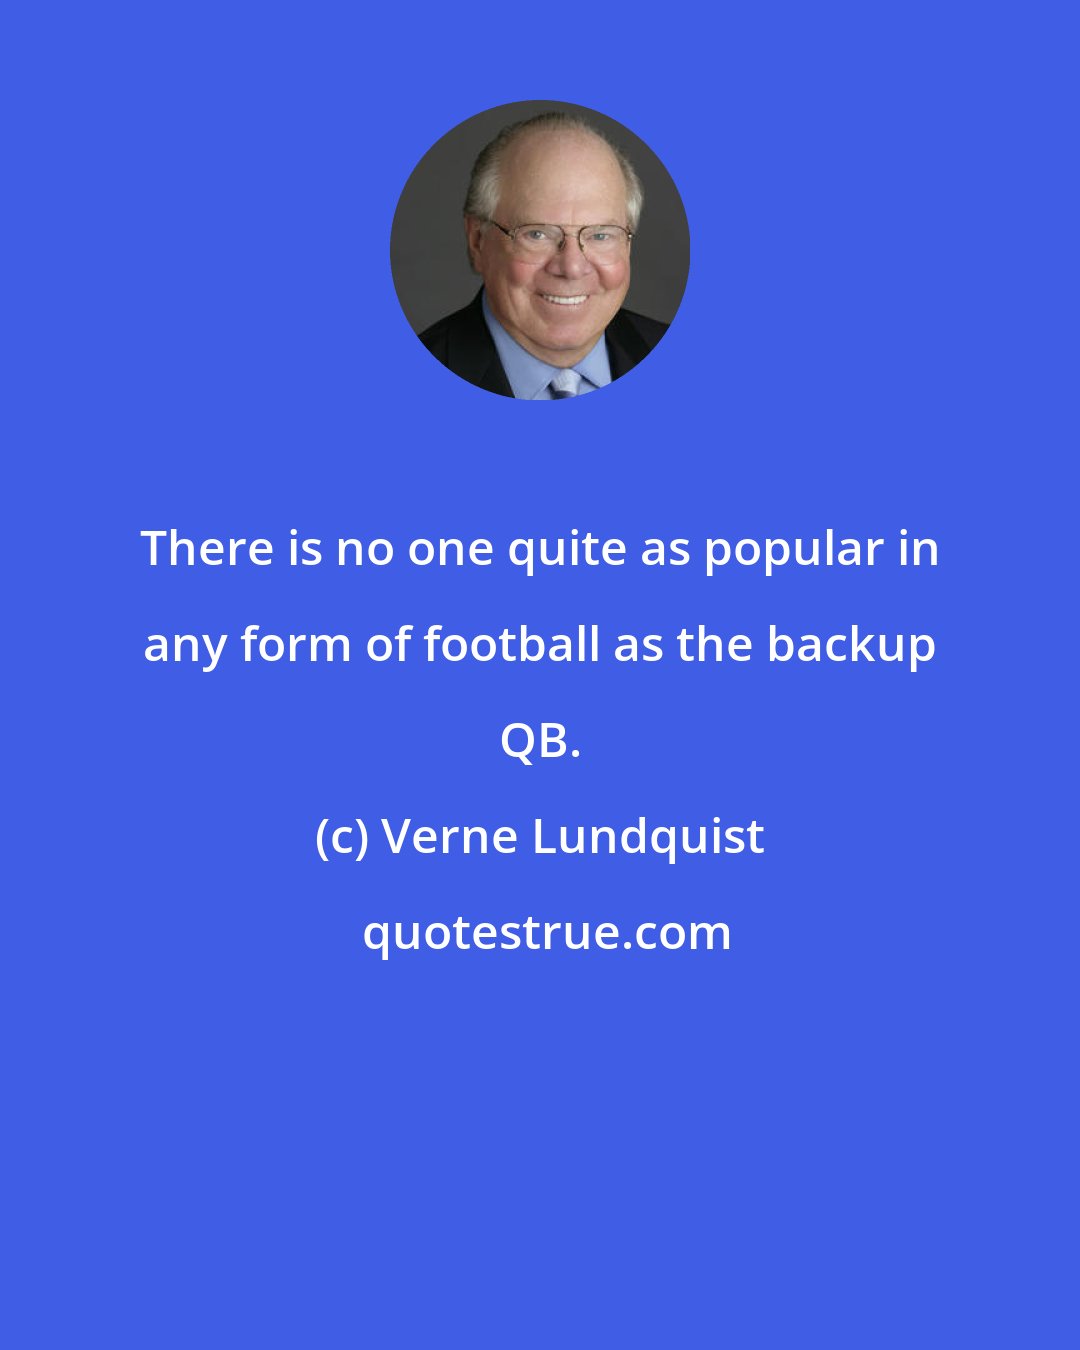 Verne Lundquist: There is no one quite as popular in any form of football as the backup QB.